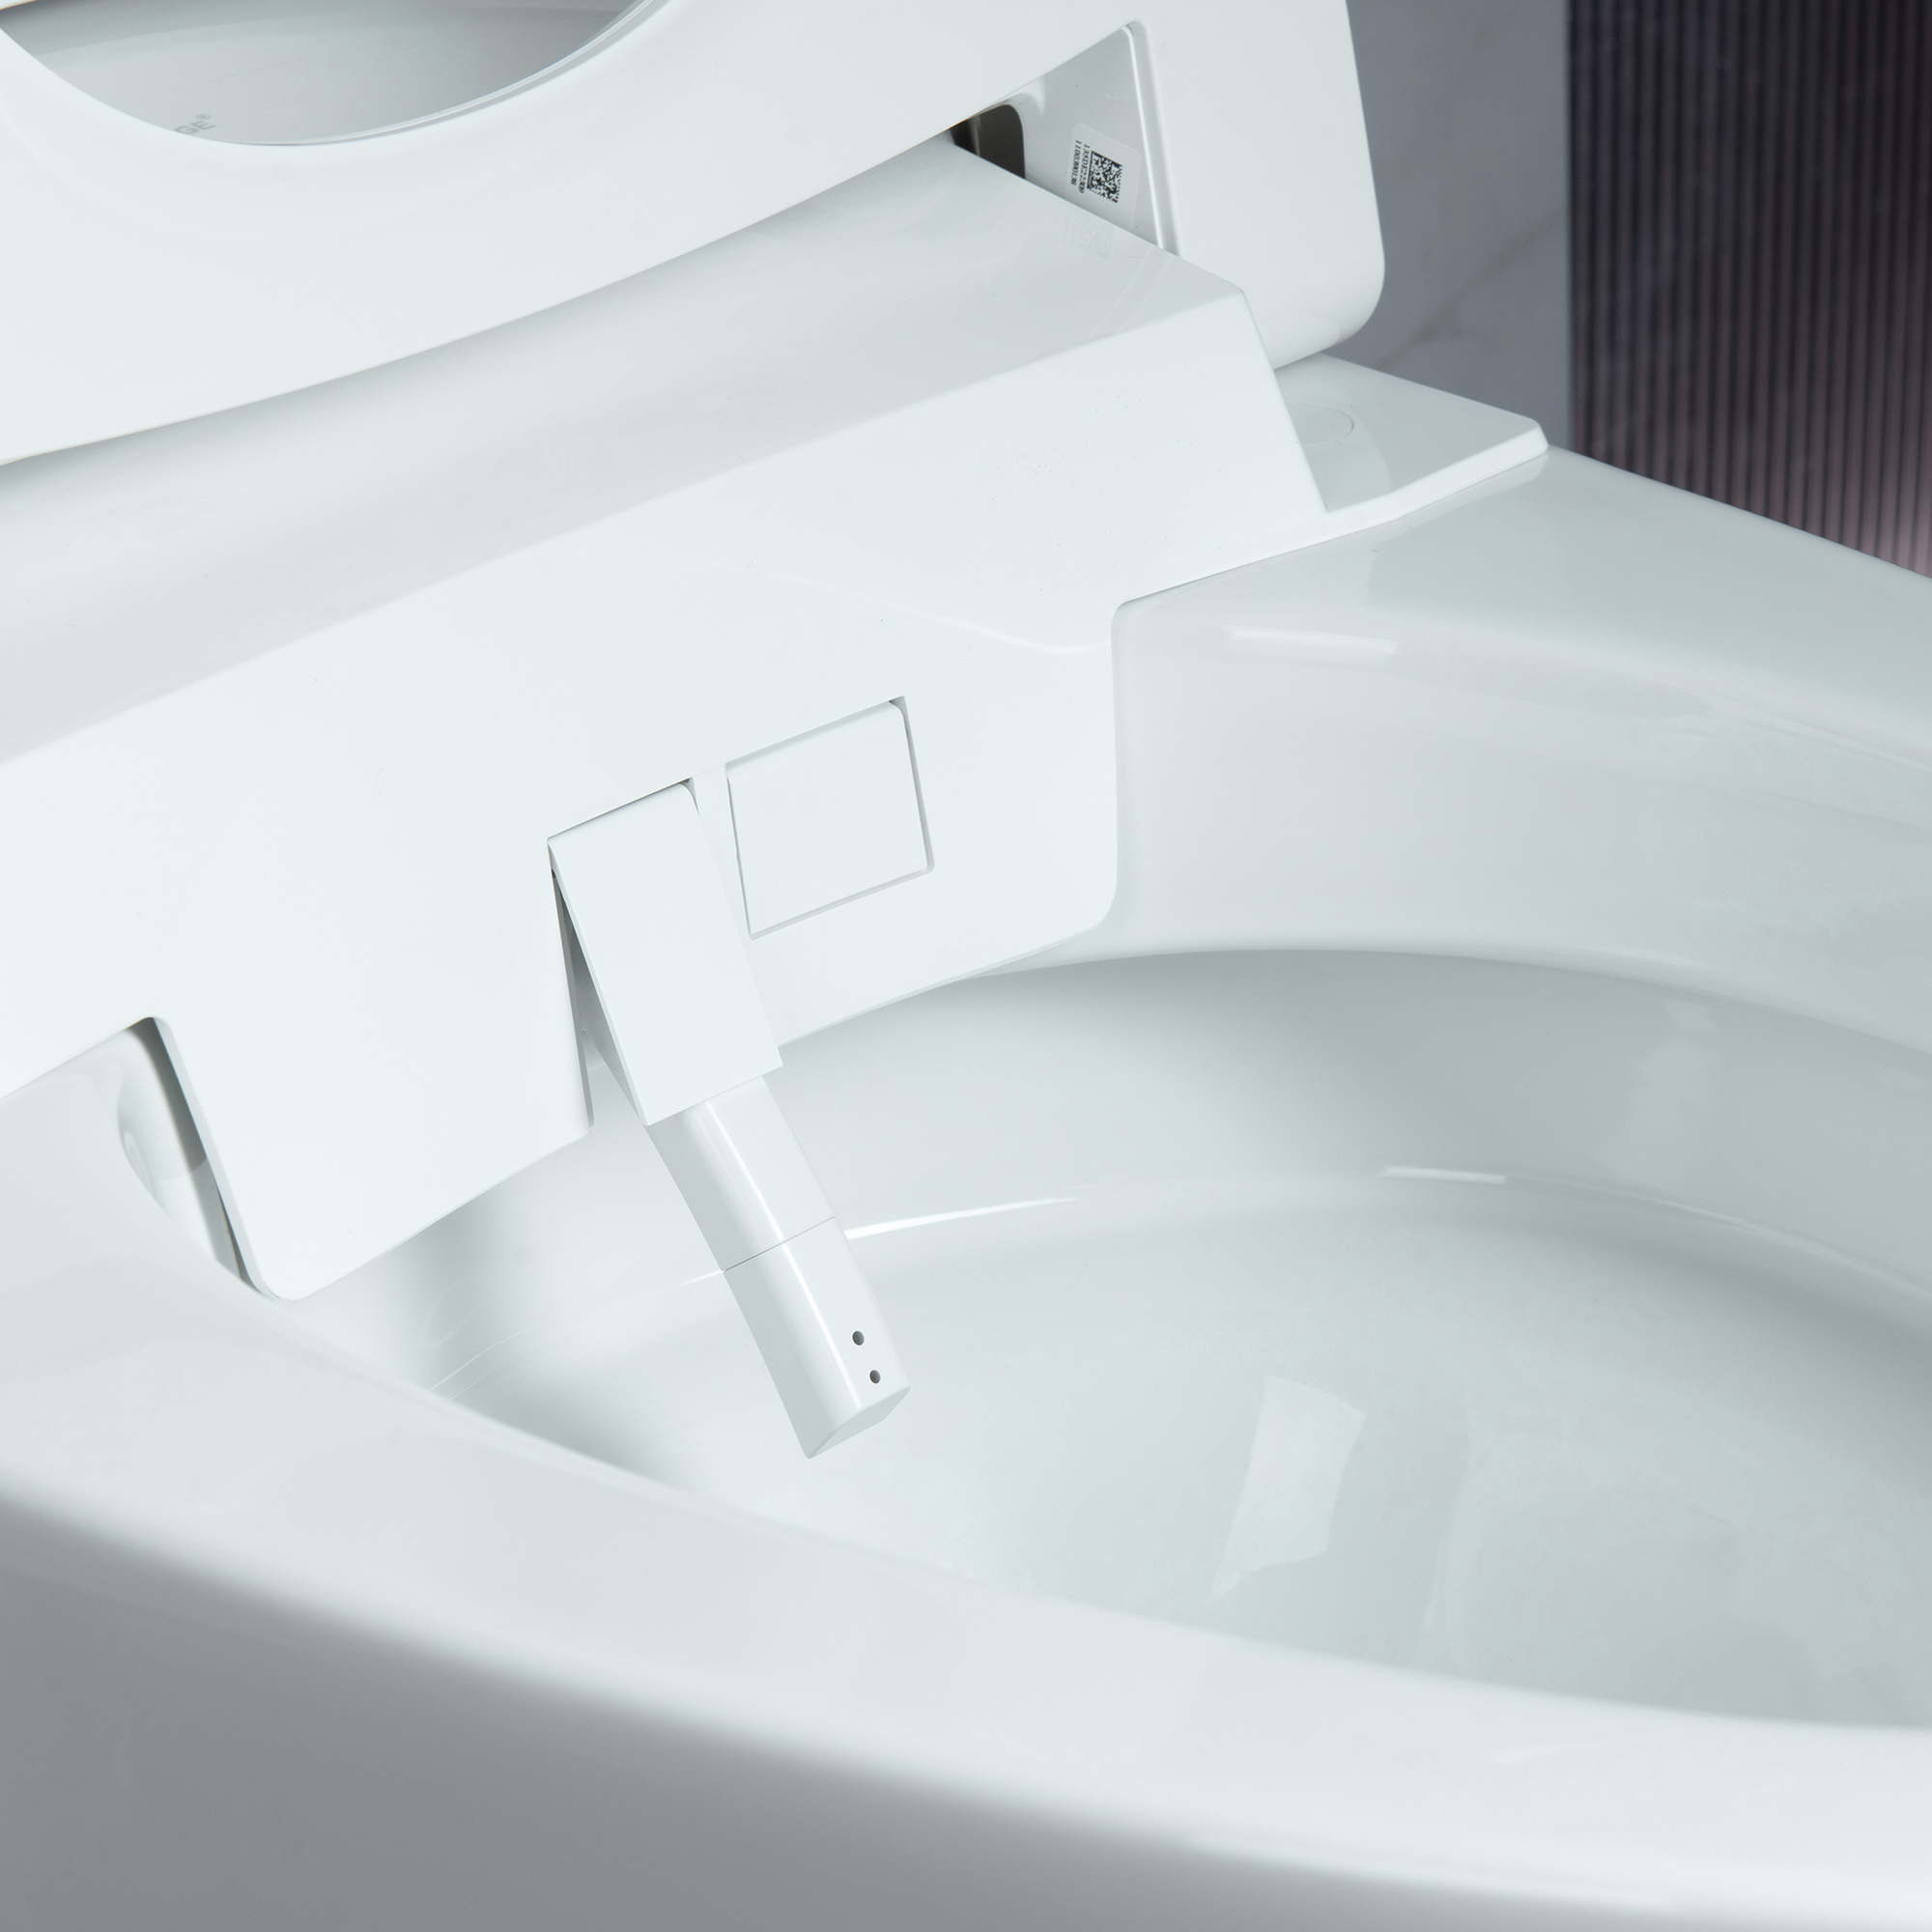  WOODBRIDGE EBT700 One Piece Elongated Smart Toilet Bidet, Auto Open & Close, Auto Flush, Foot Sensor Operation, Heated Seat with Integrated Multi Function Remote Control in White_14843